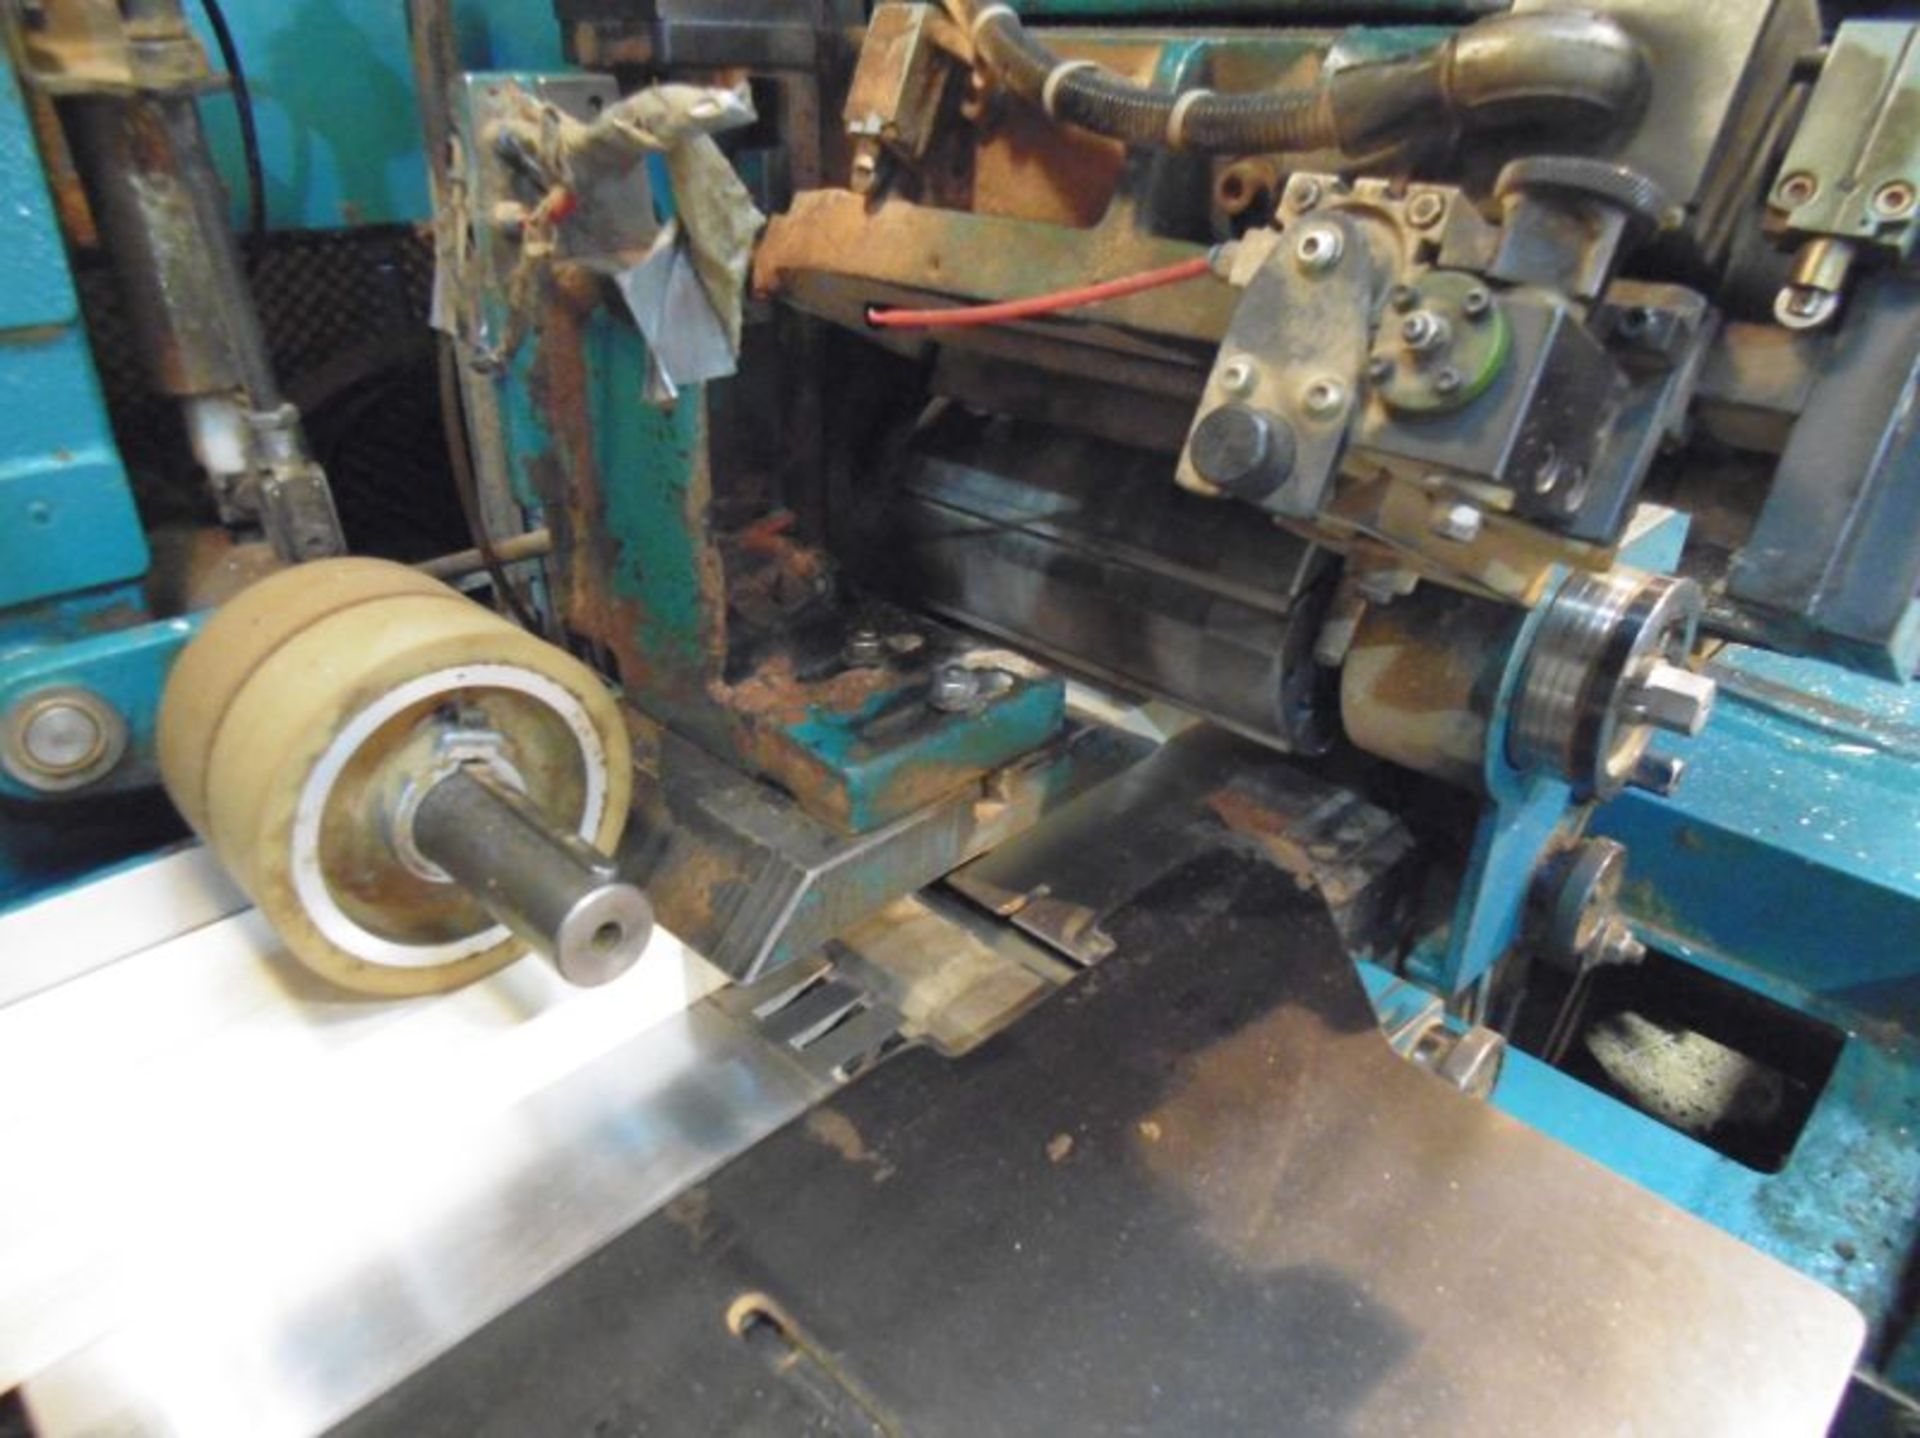 * Wadkin 6 Headed Through Feed Four Sided Planer/Moulder with full sound enclosure. Year 2000. Model - Image 15 of 20